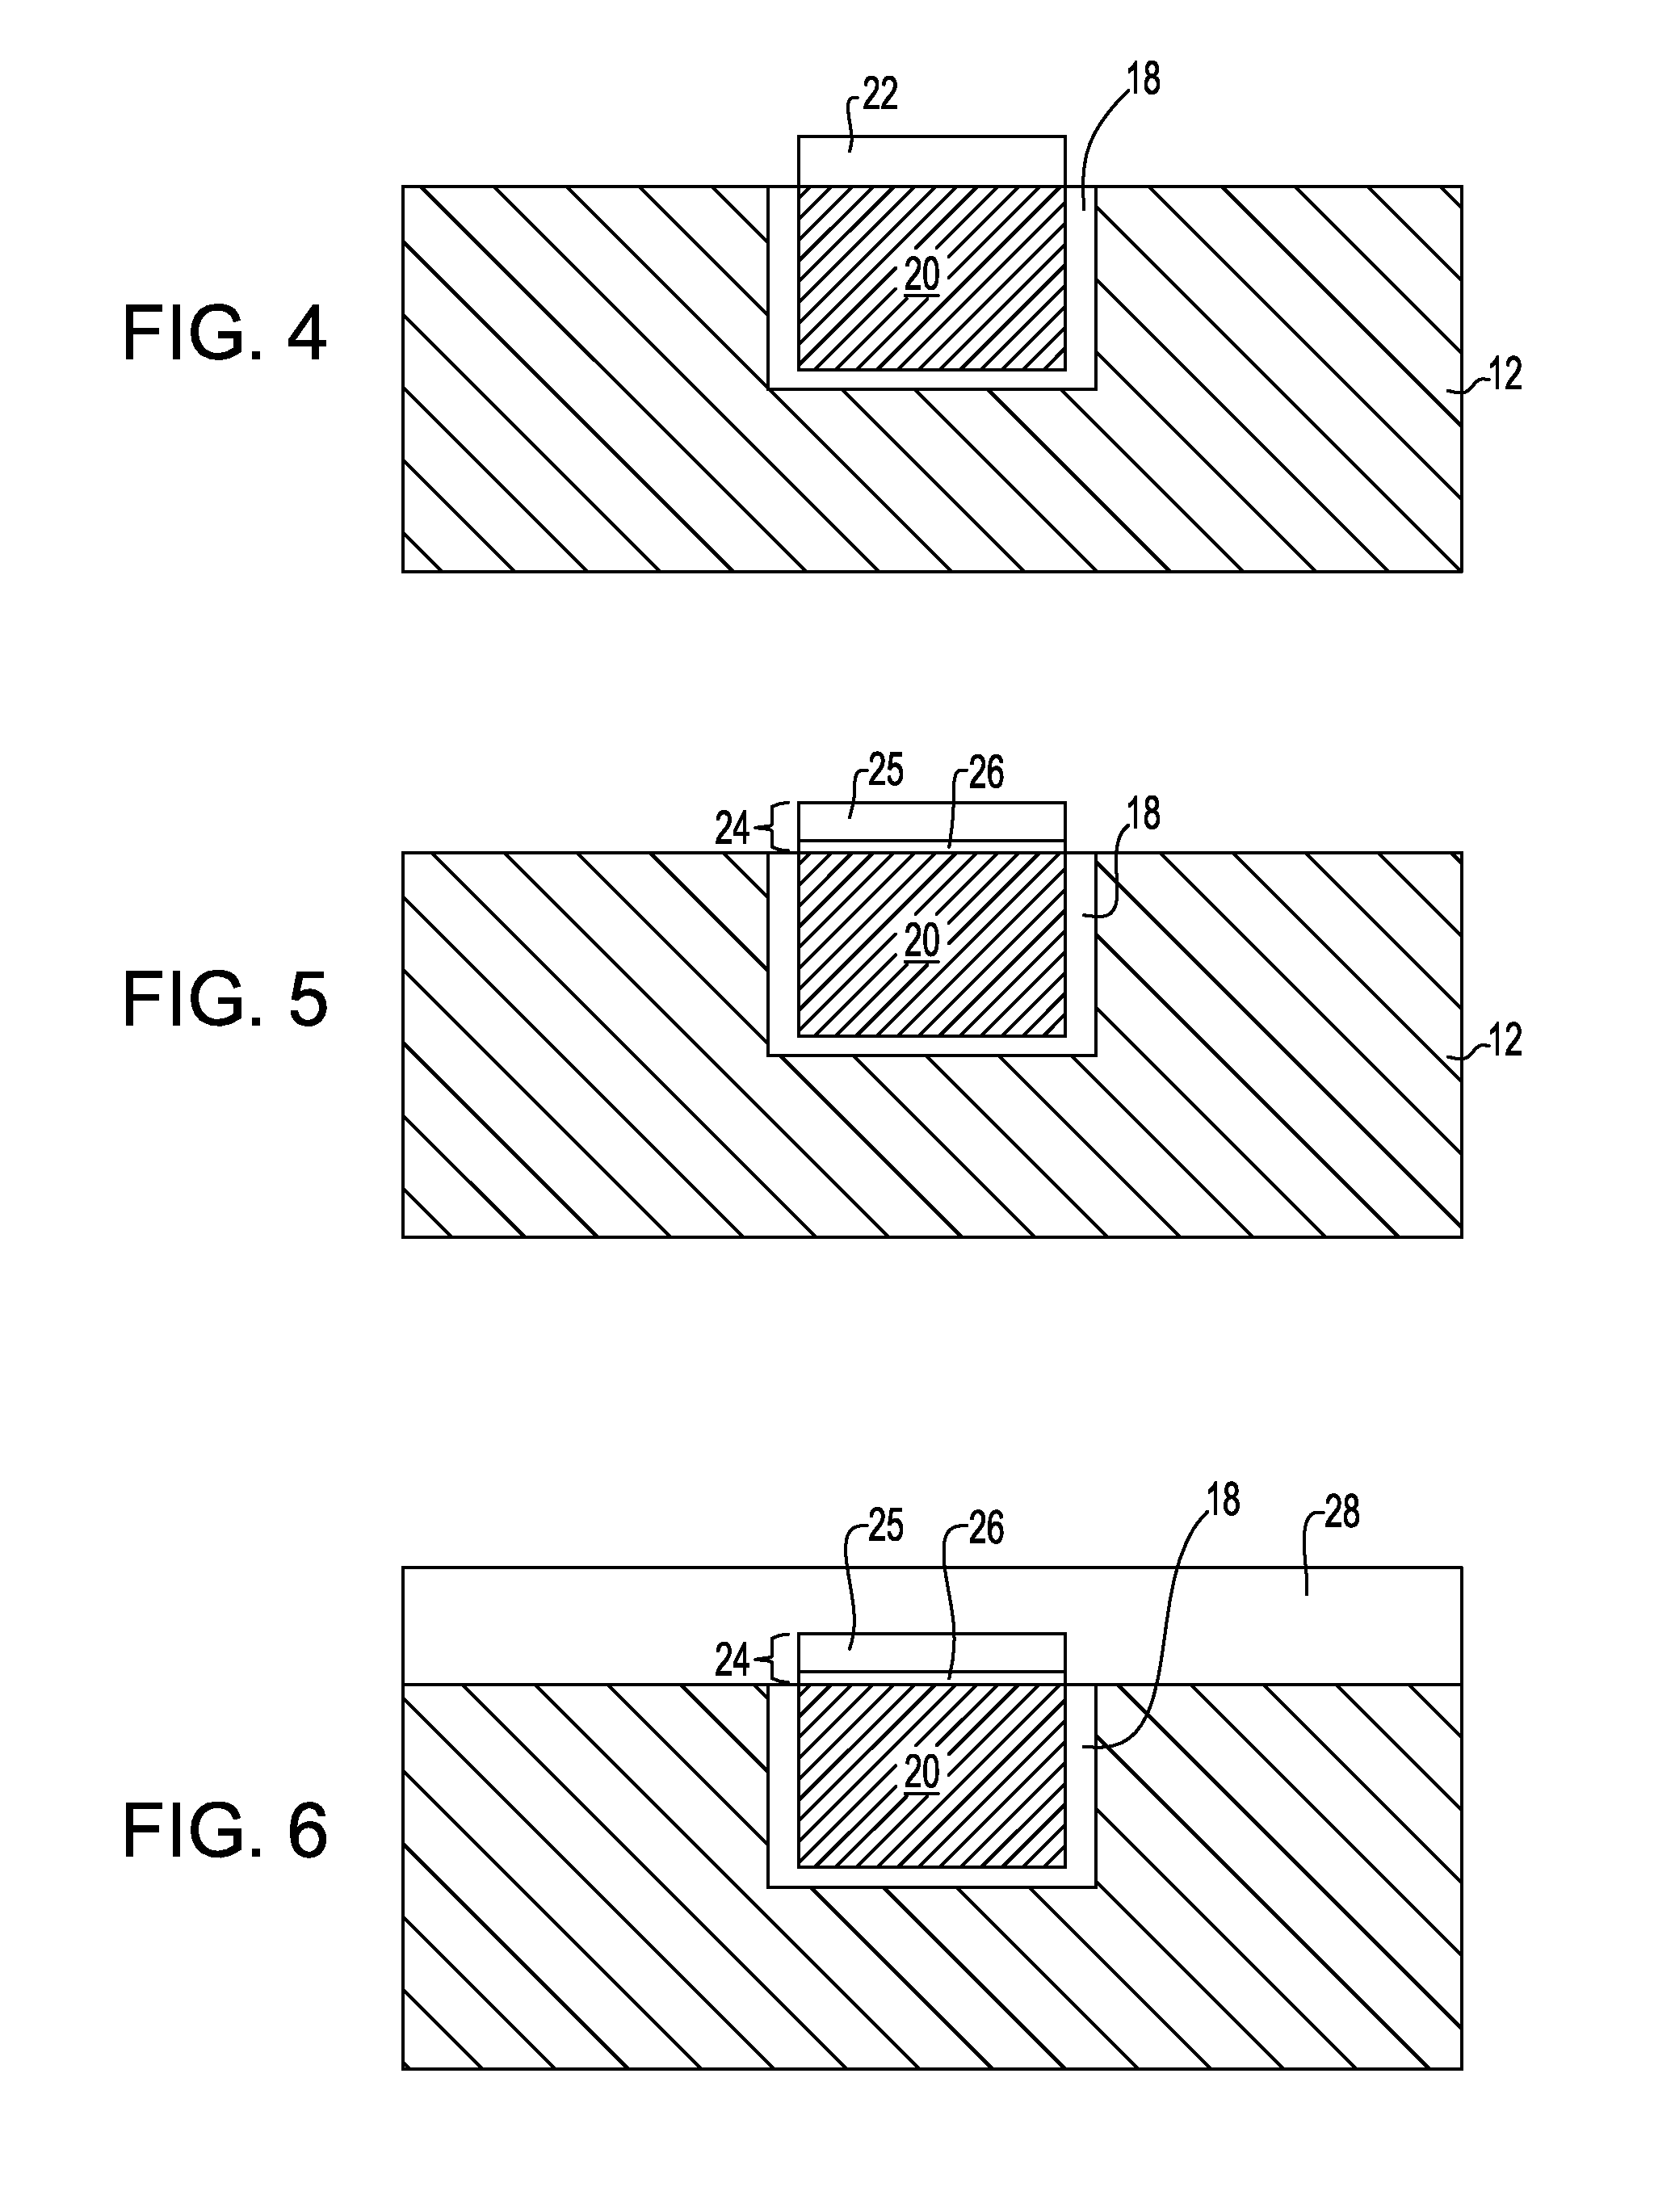 SELF-ALIGNED COMPOSITE M-MOx/DIELECTRIC CAP FOR Cu INTERCONNECT STRUCTURES